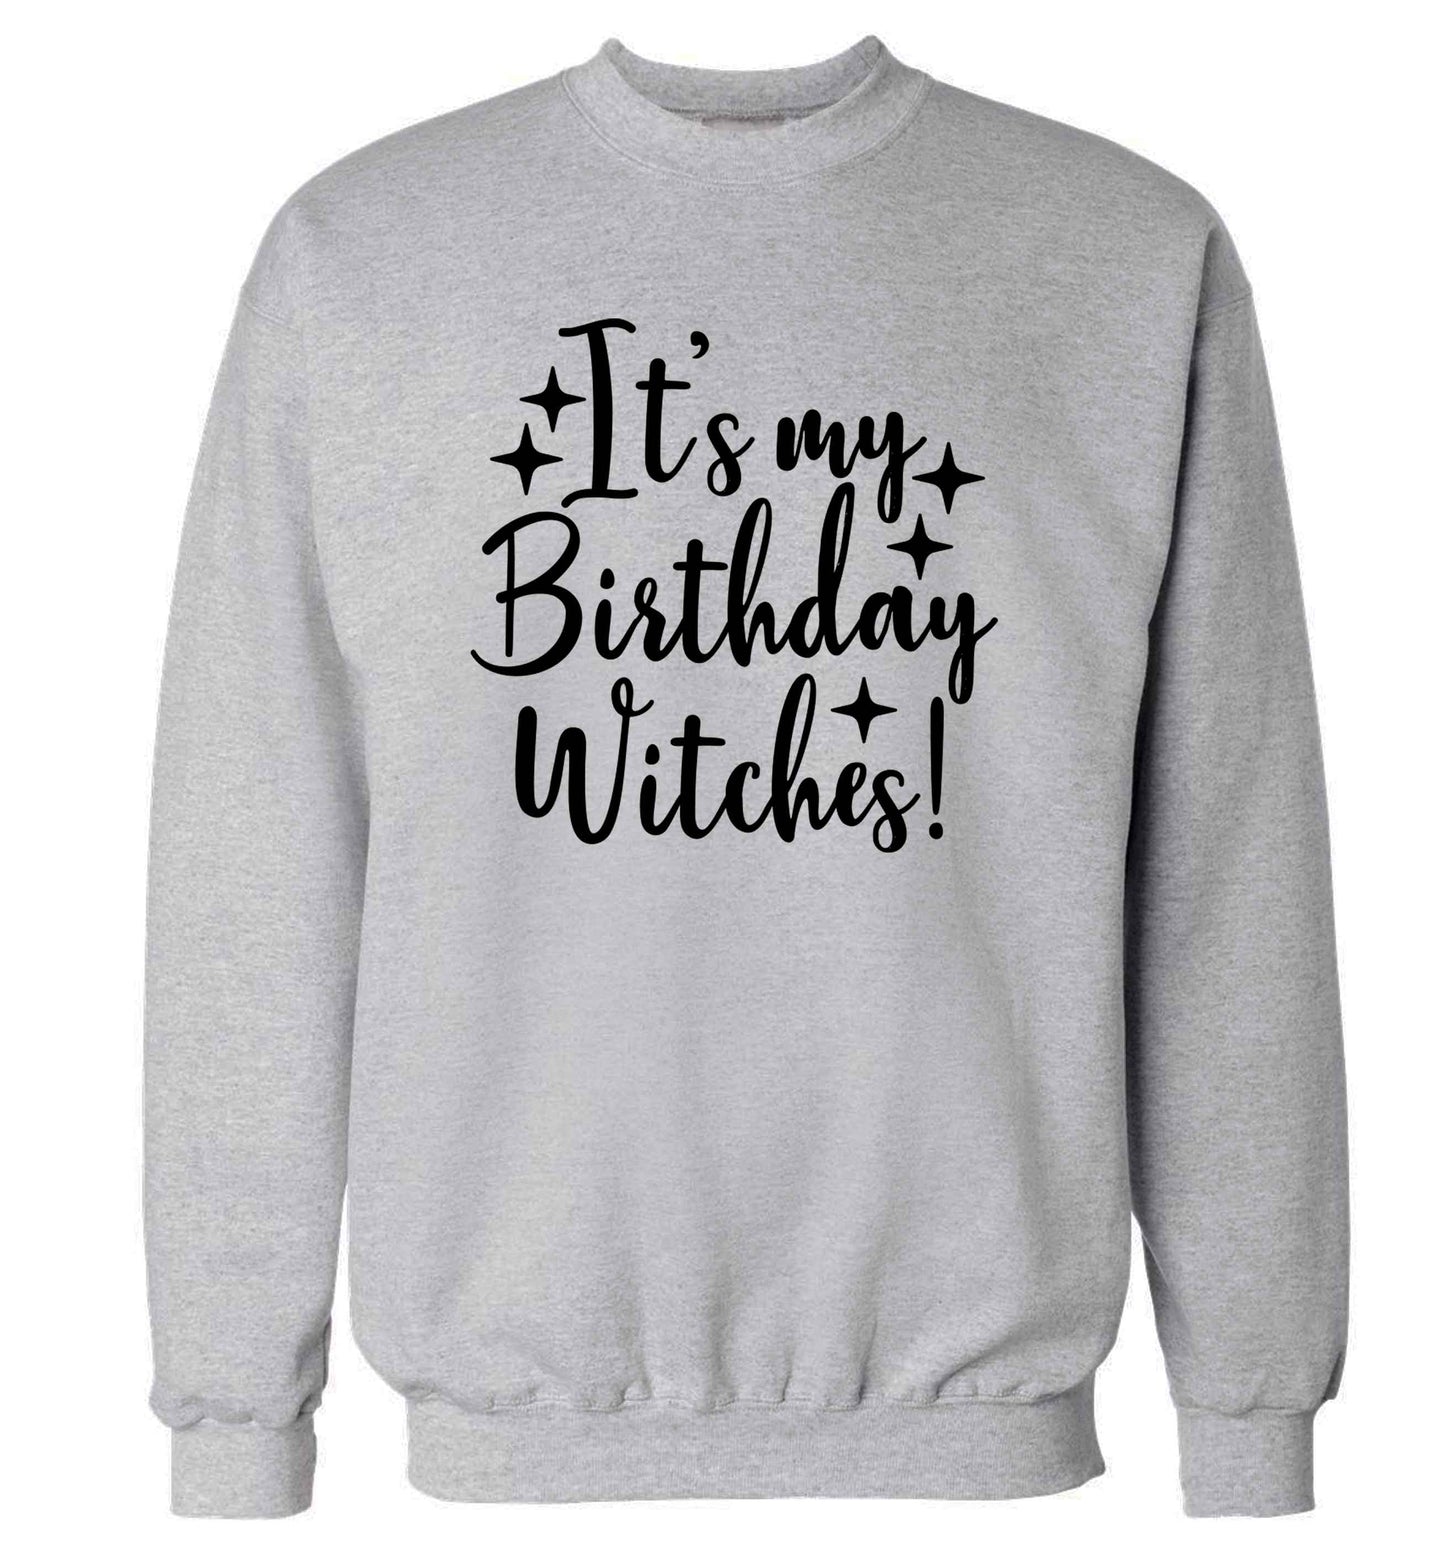 It's my birthday witches!adult's unisex grey sweater 2XL